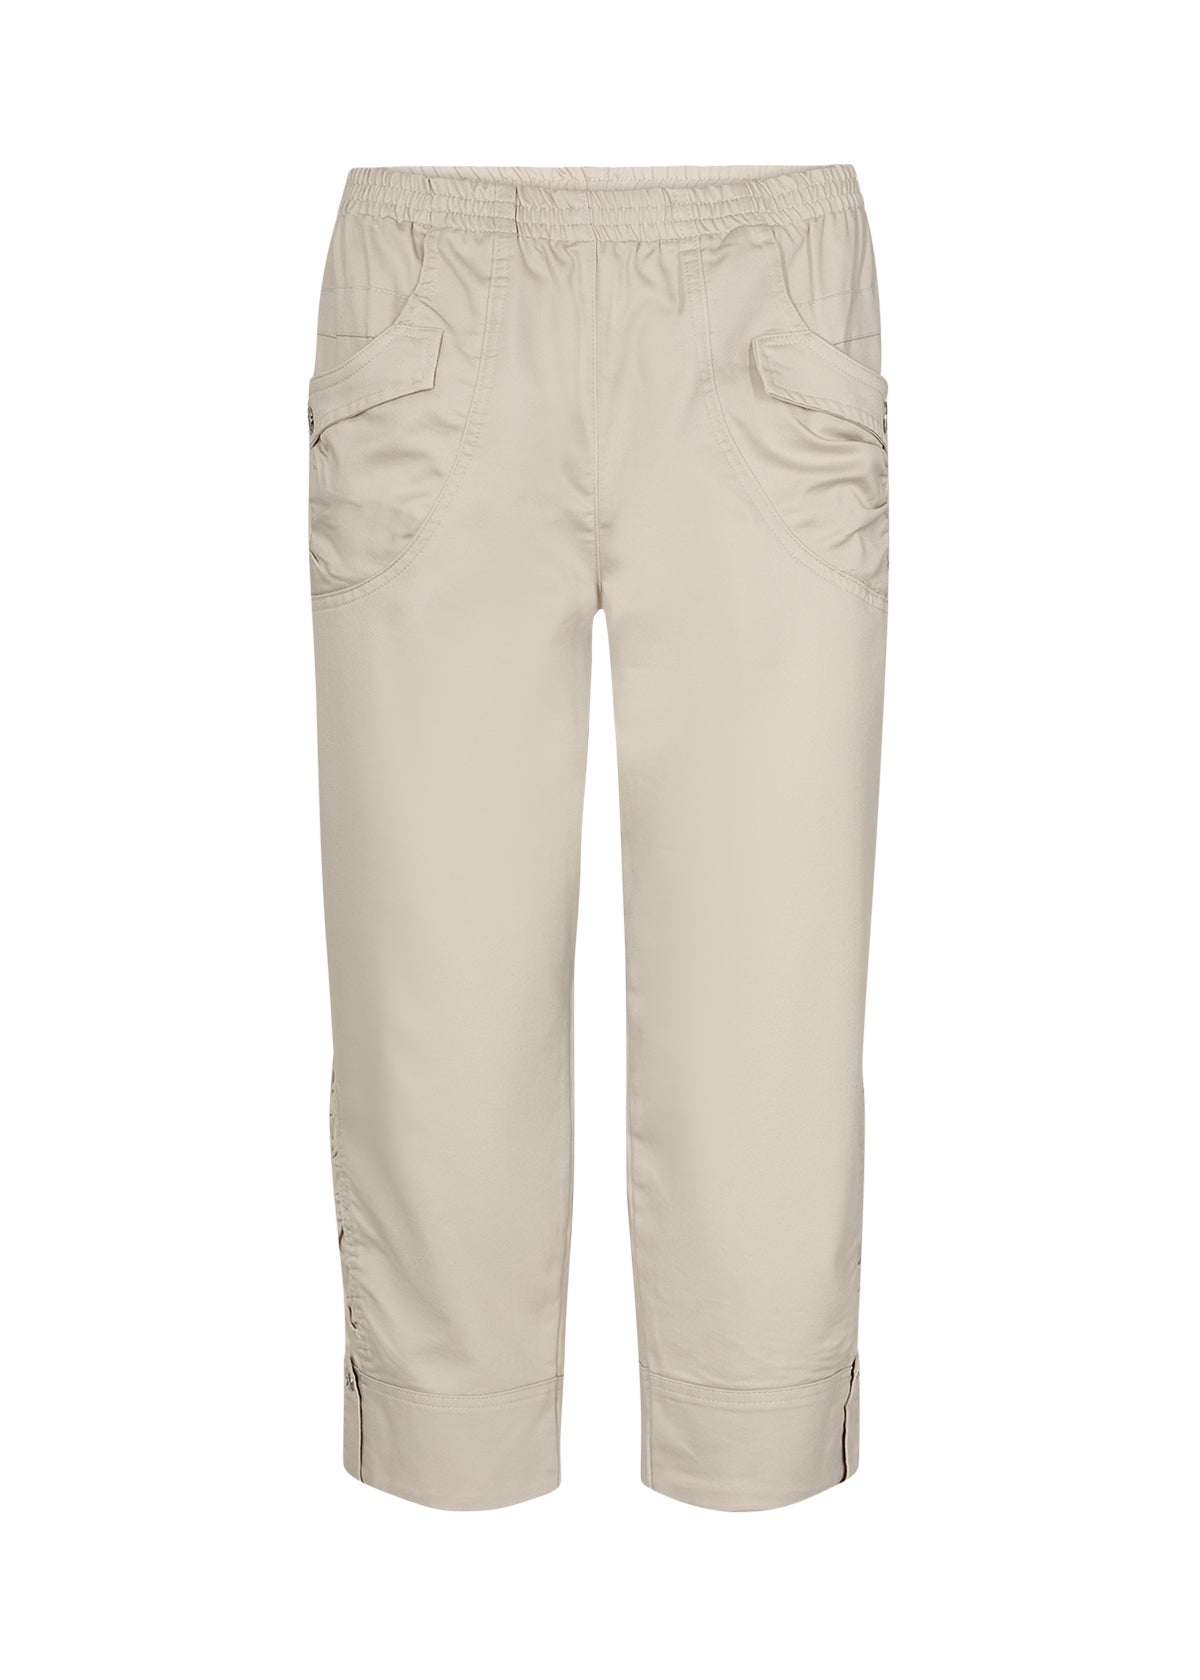 Soyaconcept Turn Up Cuff Crop Trouser